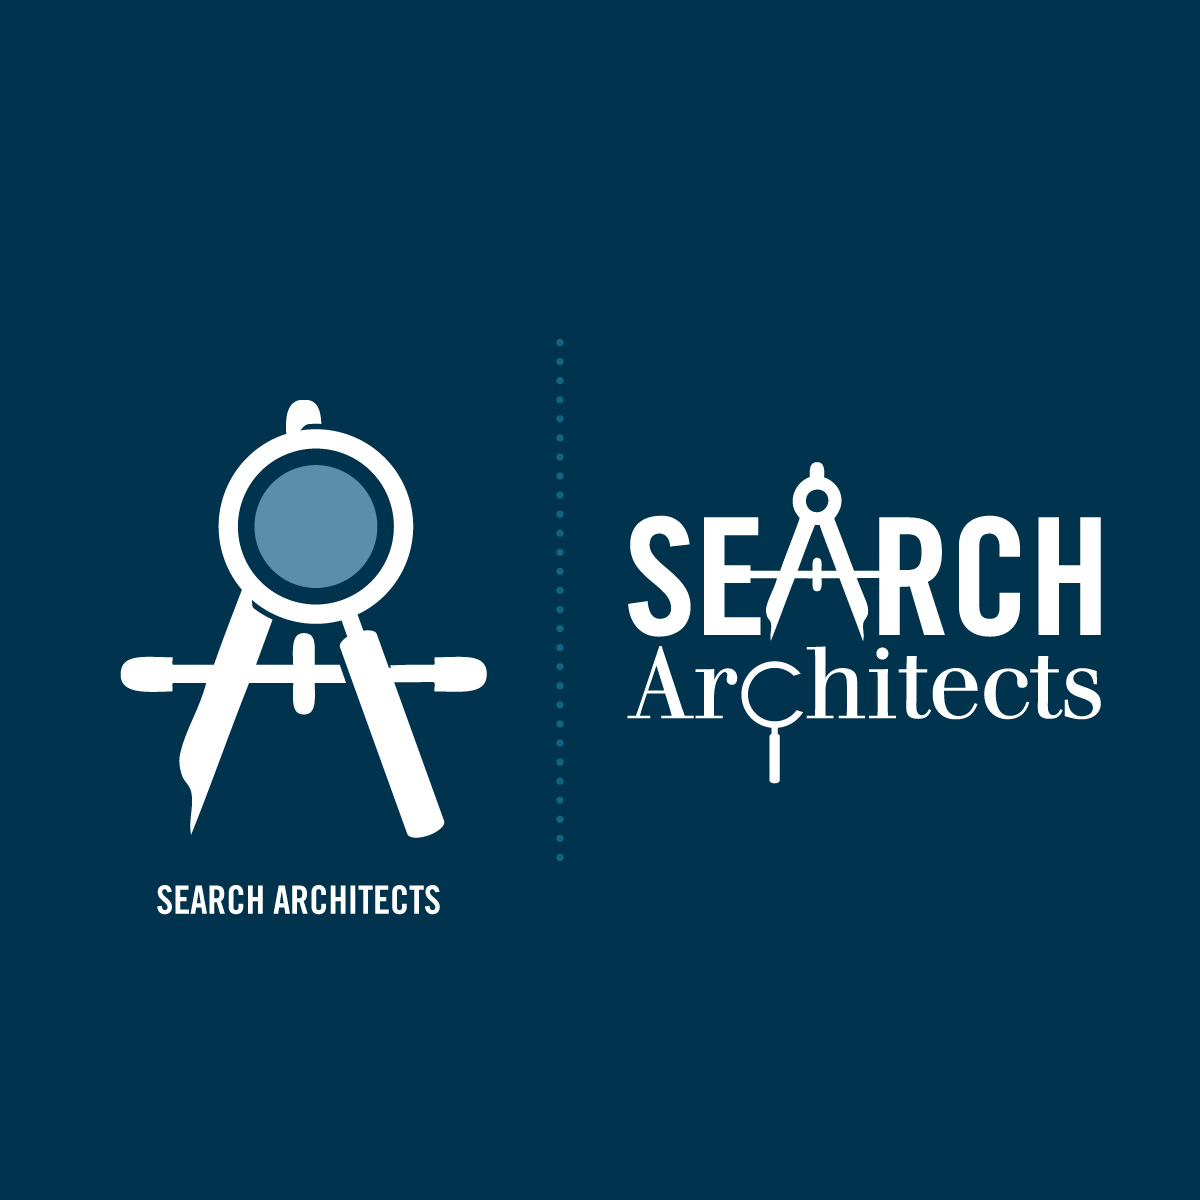 search architects logo and wordmark